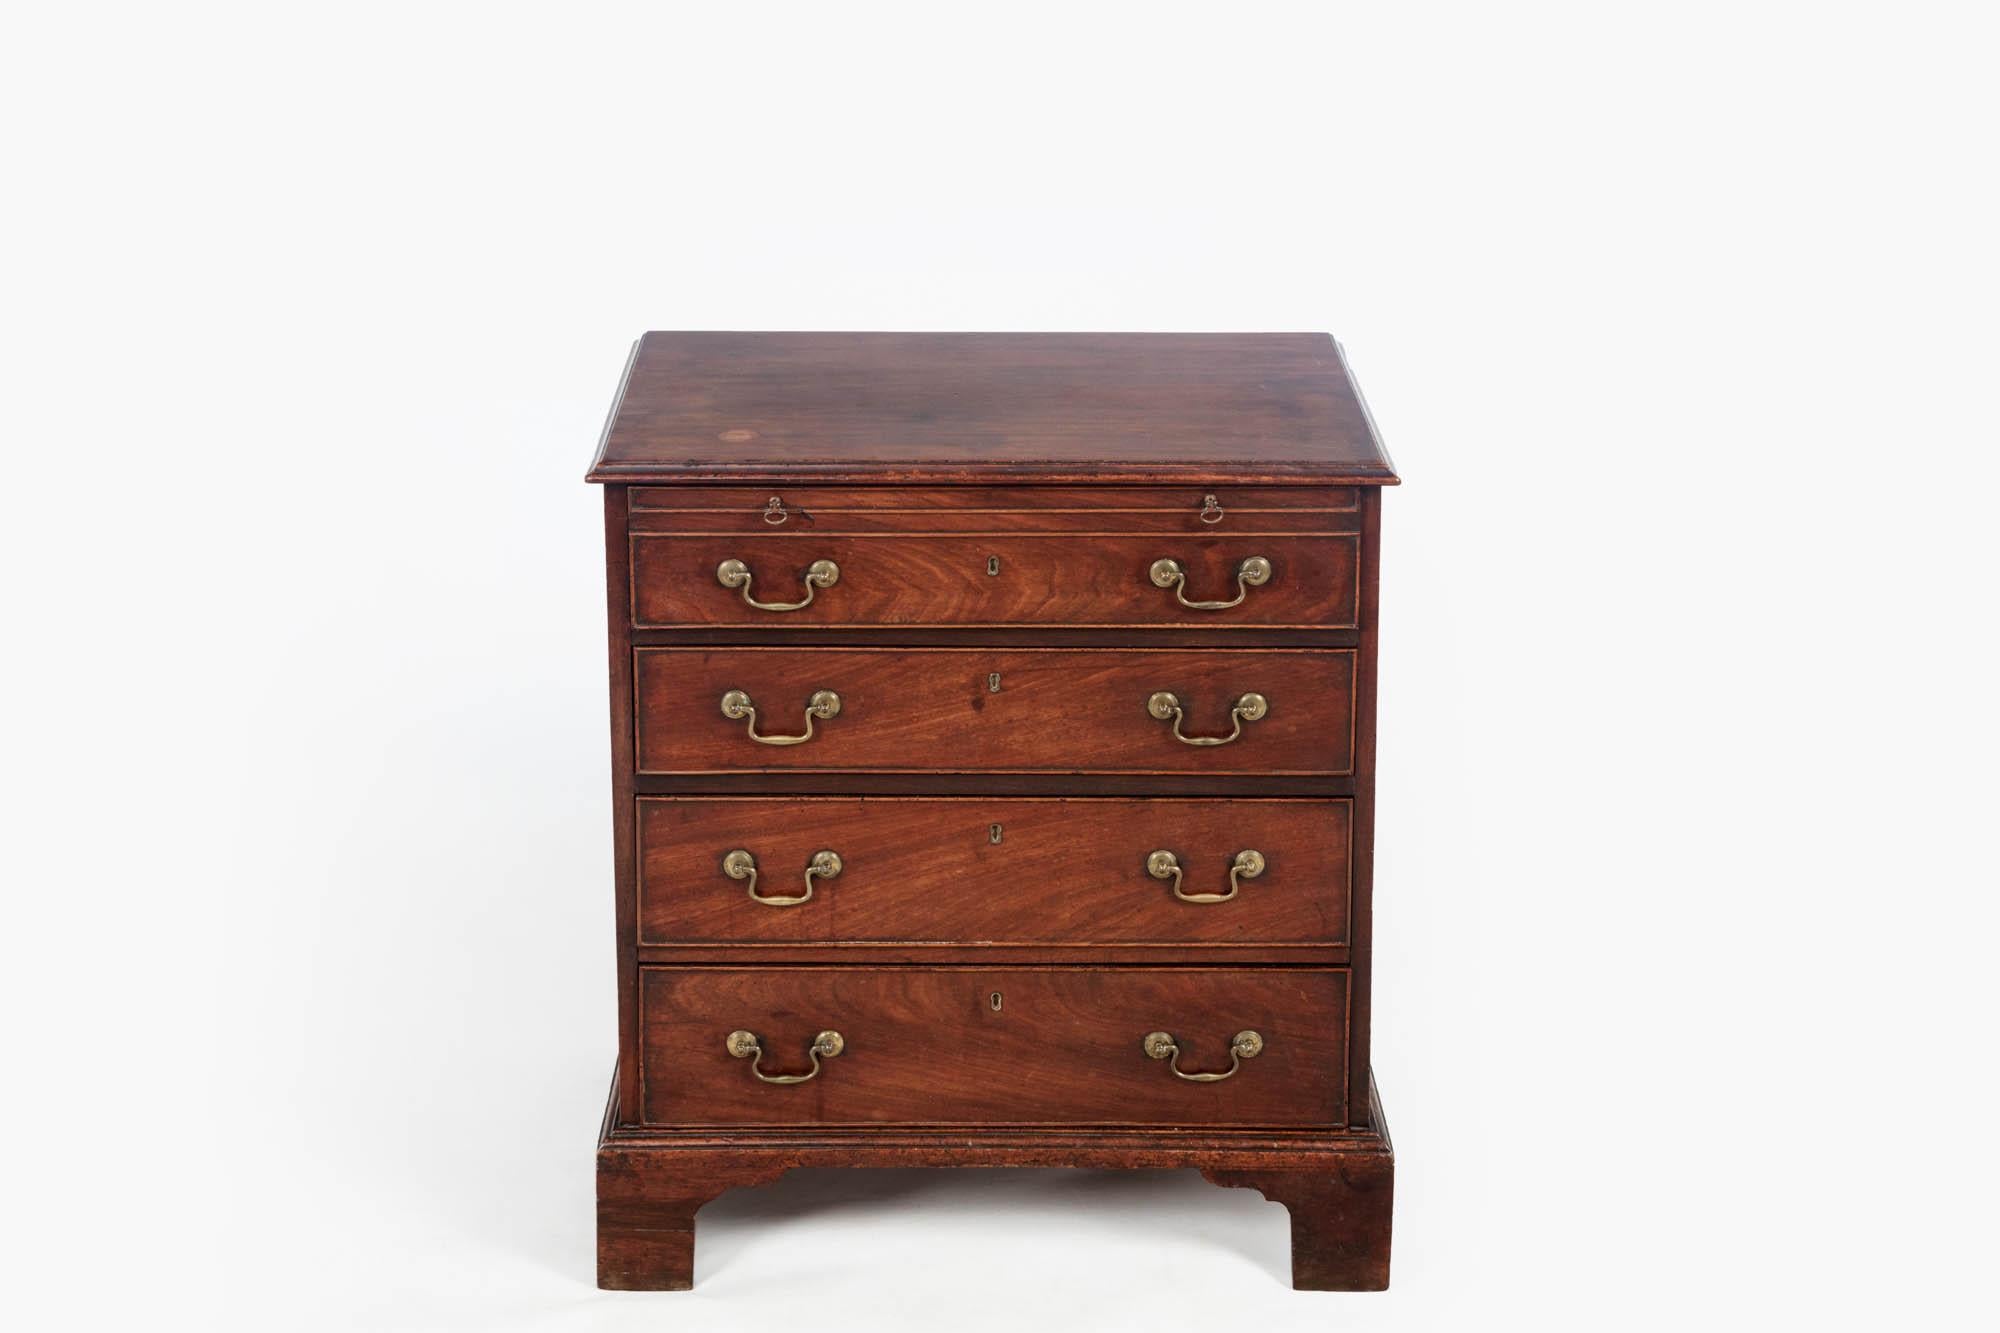 18th century George III Mahogany Bachelor’s chest. Petit in size, the plain top is surrounded by ogee molding. The four graduated, cockbeaded drawer fronts have a flame figure and patina typical of Cuban mahogany. This piece sits on bracket feet and